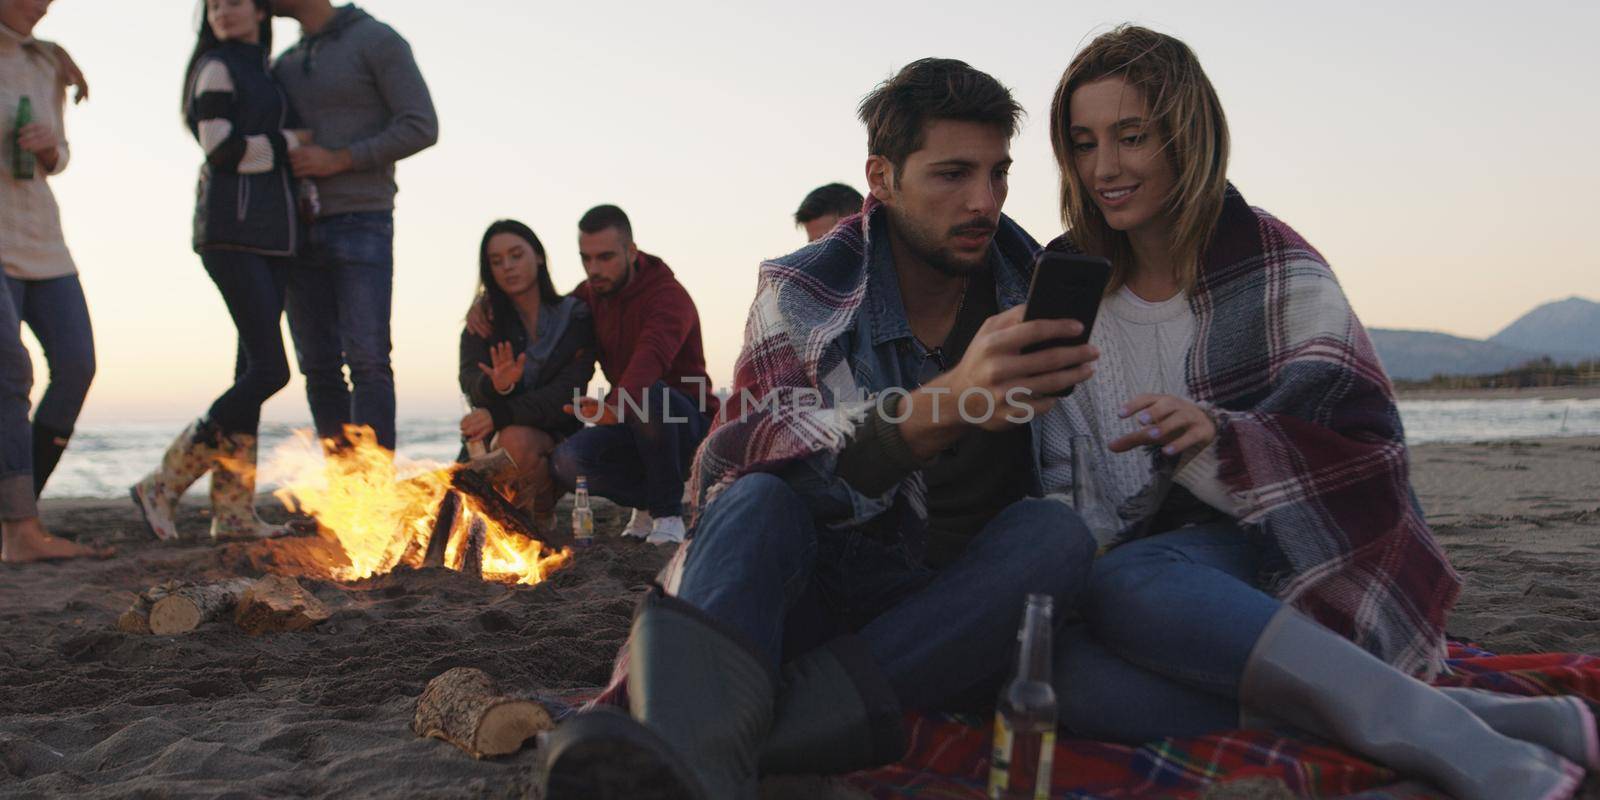 Couple enjoying bonfire with friends on beach by dotshock